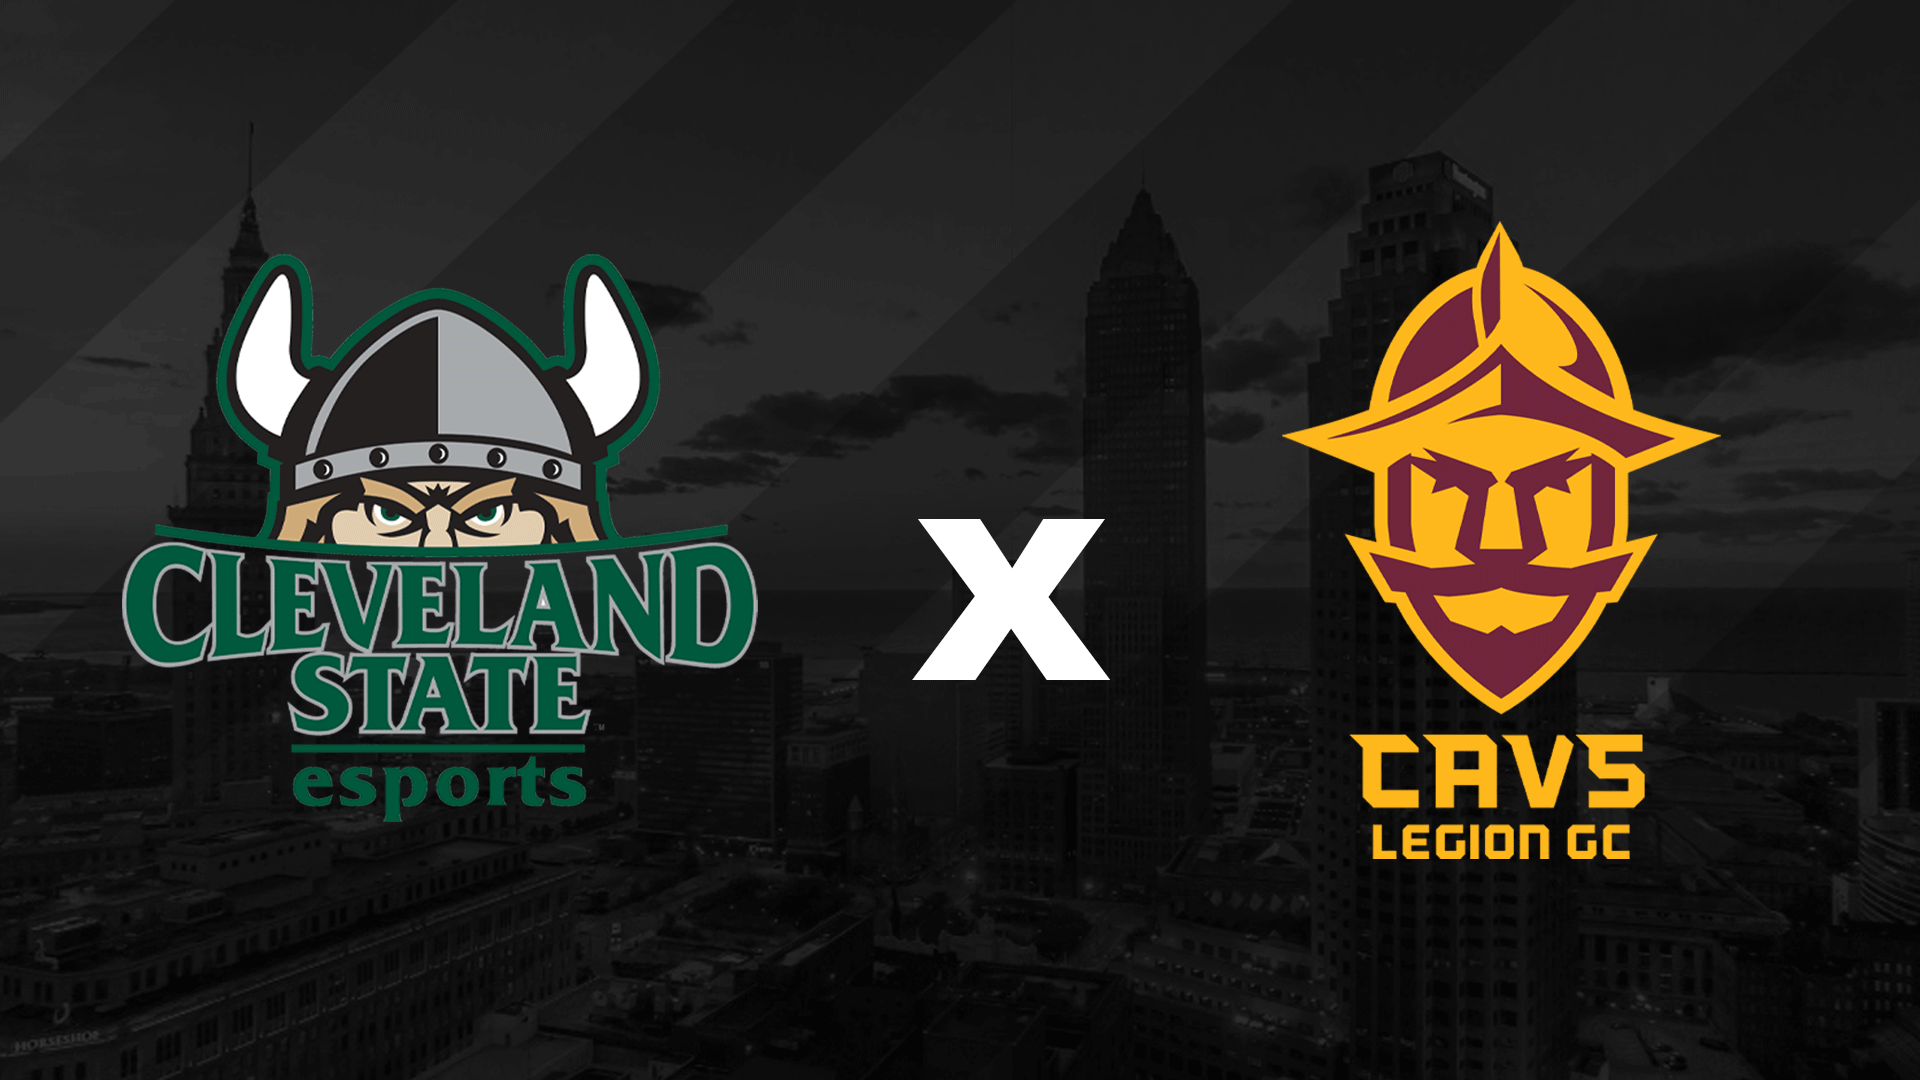 Cleveland State Esports Names Cavs Legion Lair Lit by TCP  as Home Venue for Inaugural Season